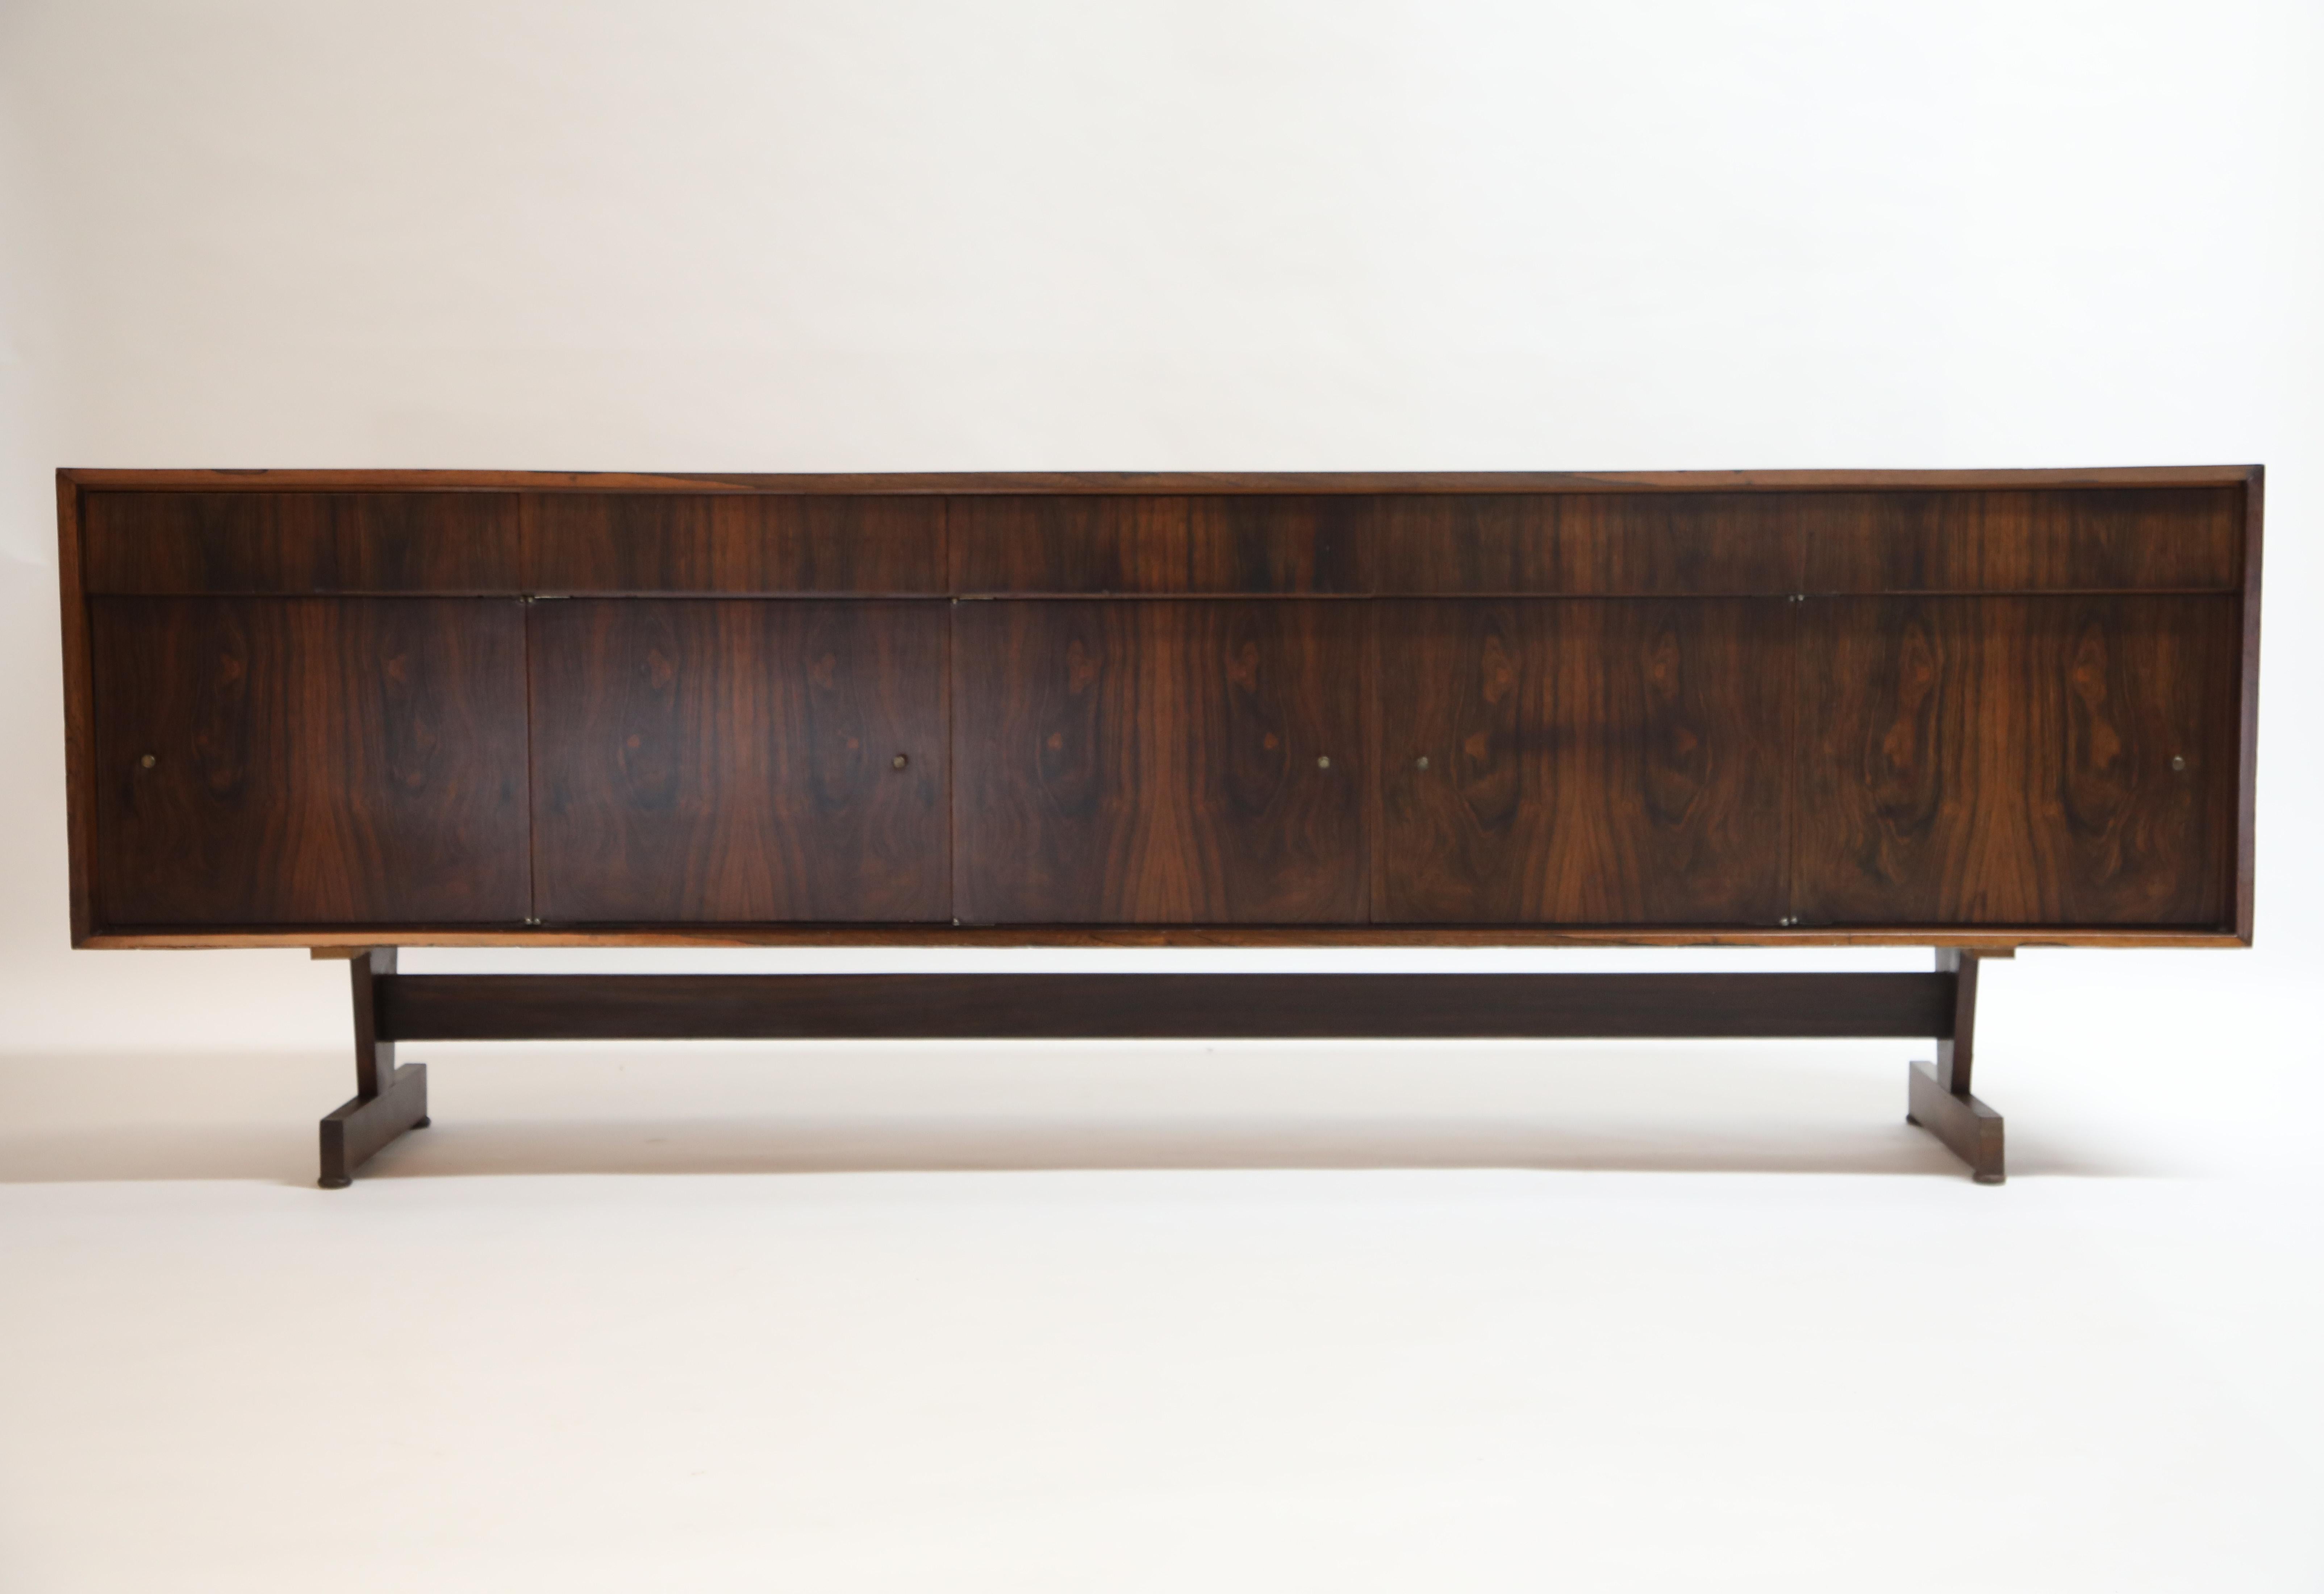 This incredible Joaquim Tenreiro sideboard possesses an incredibly vivid detail to the book-matched Brazilian Jacaranda rosewood grain. Designed and crafted in the mid to late 1950s, this piece still retains its original maker labels on the rear